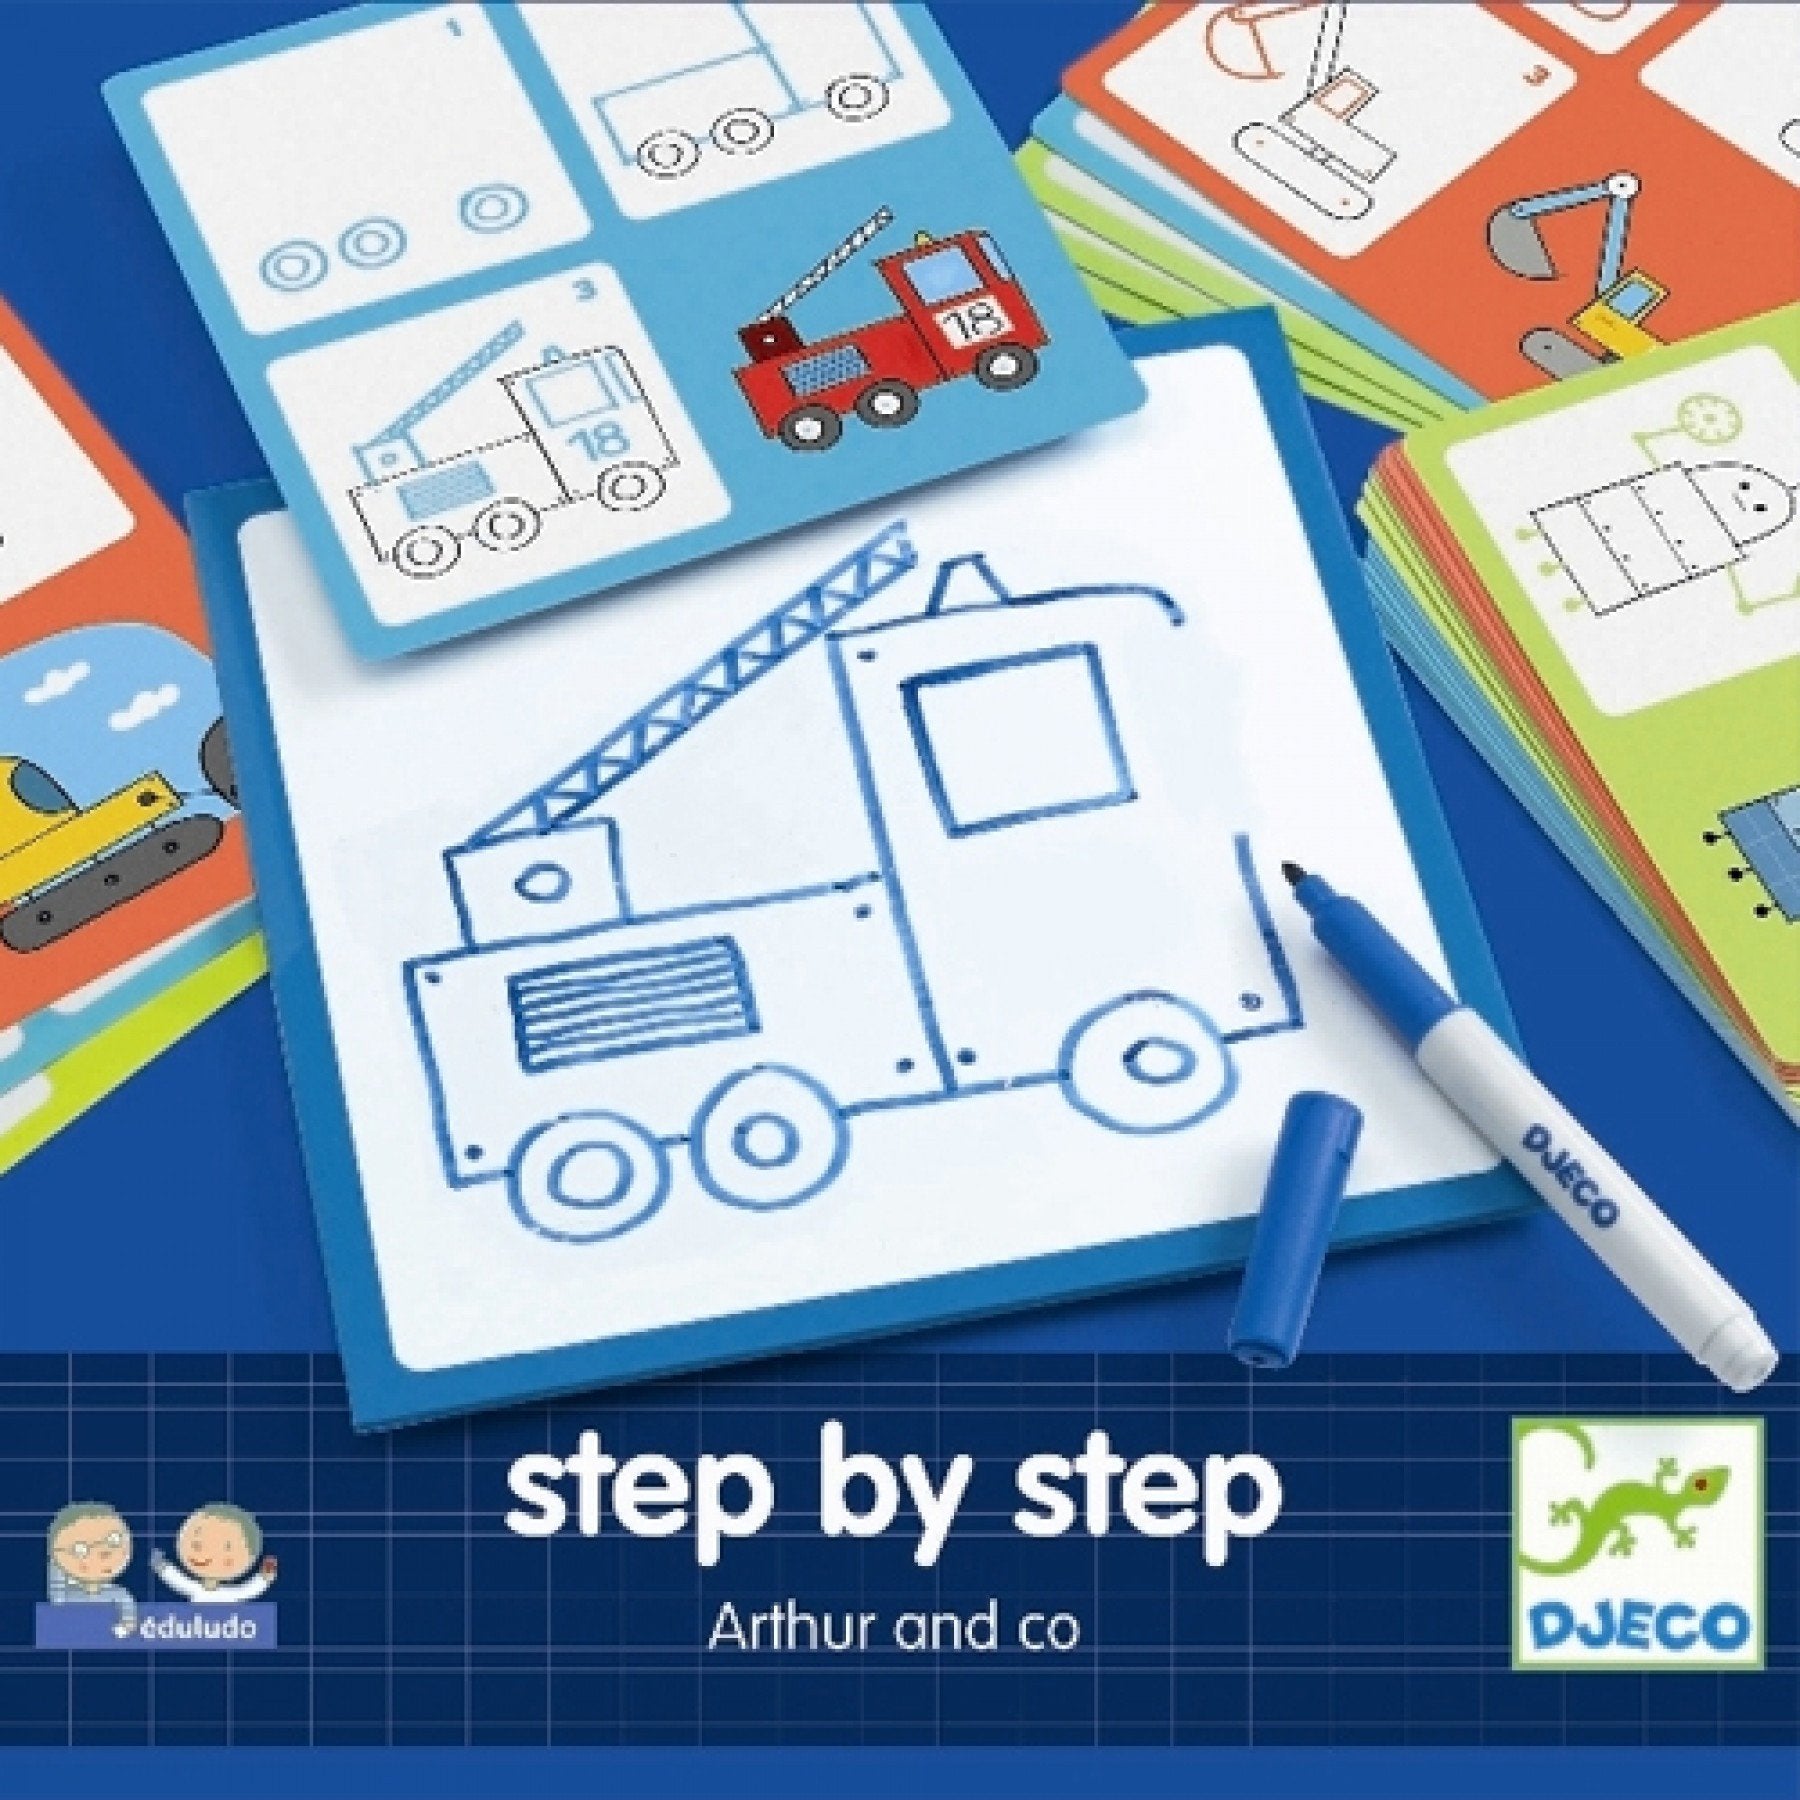 Djeco Eduludo step by step Arthur and Co